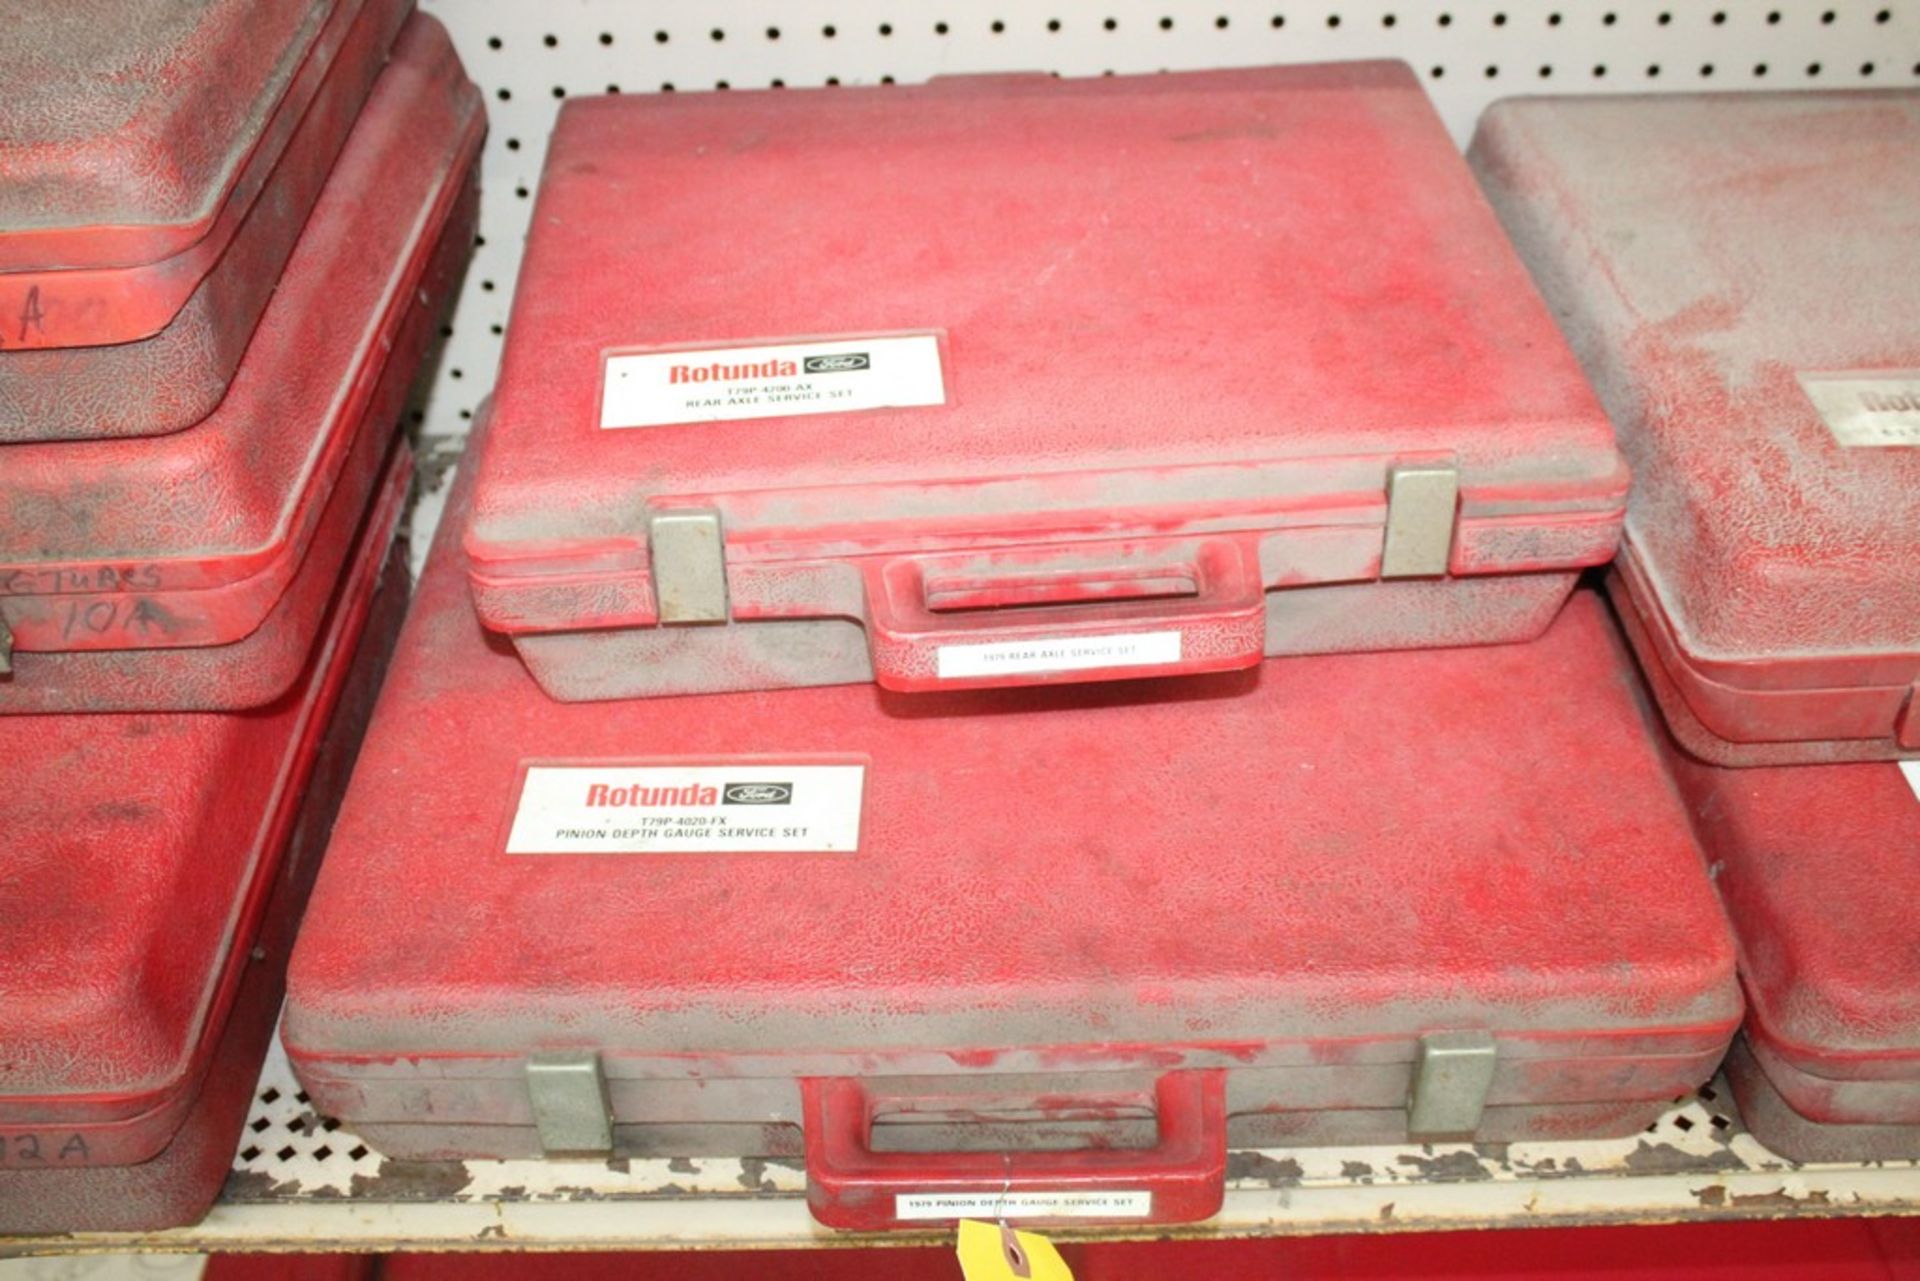 ASSORTED 1979 FORD ROTUNDA ESSENTIAL SERVICE TOOL SETS IN TWO CASES